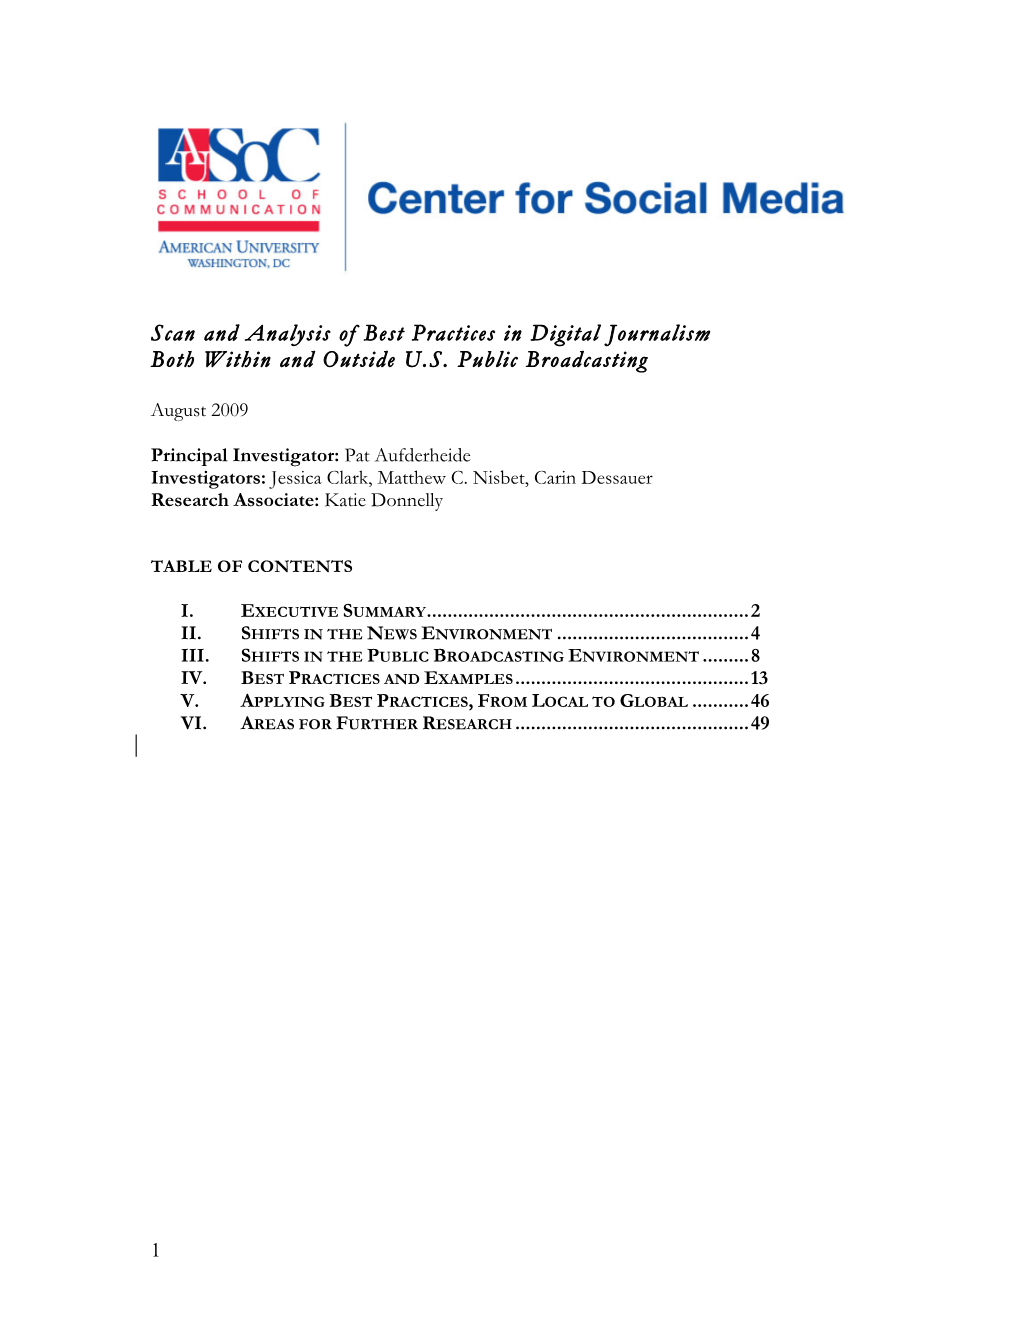 Scan and Analysis of Best Practices in Digital Journalism Both Within and Outside U.S